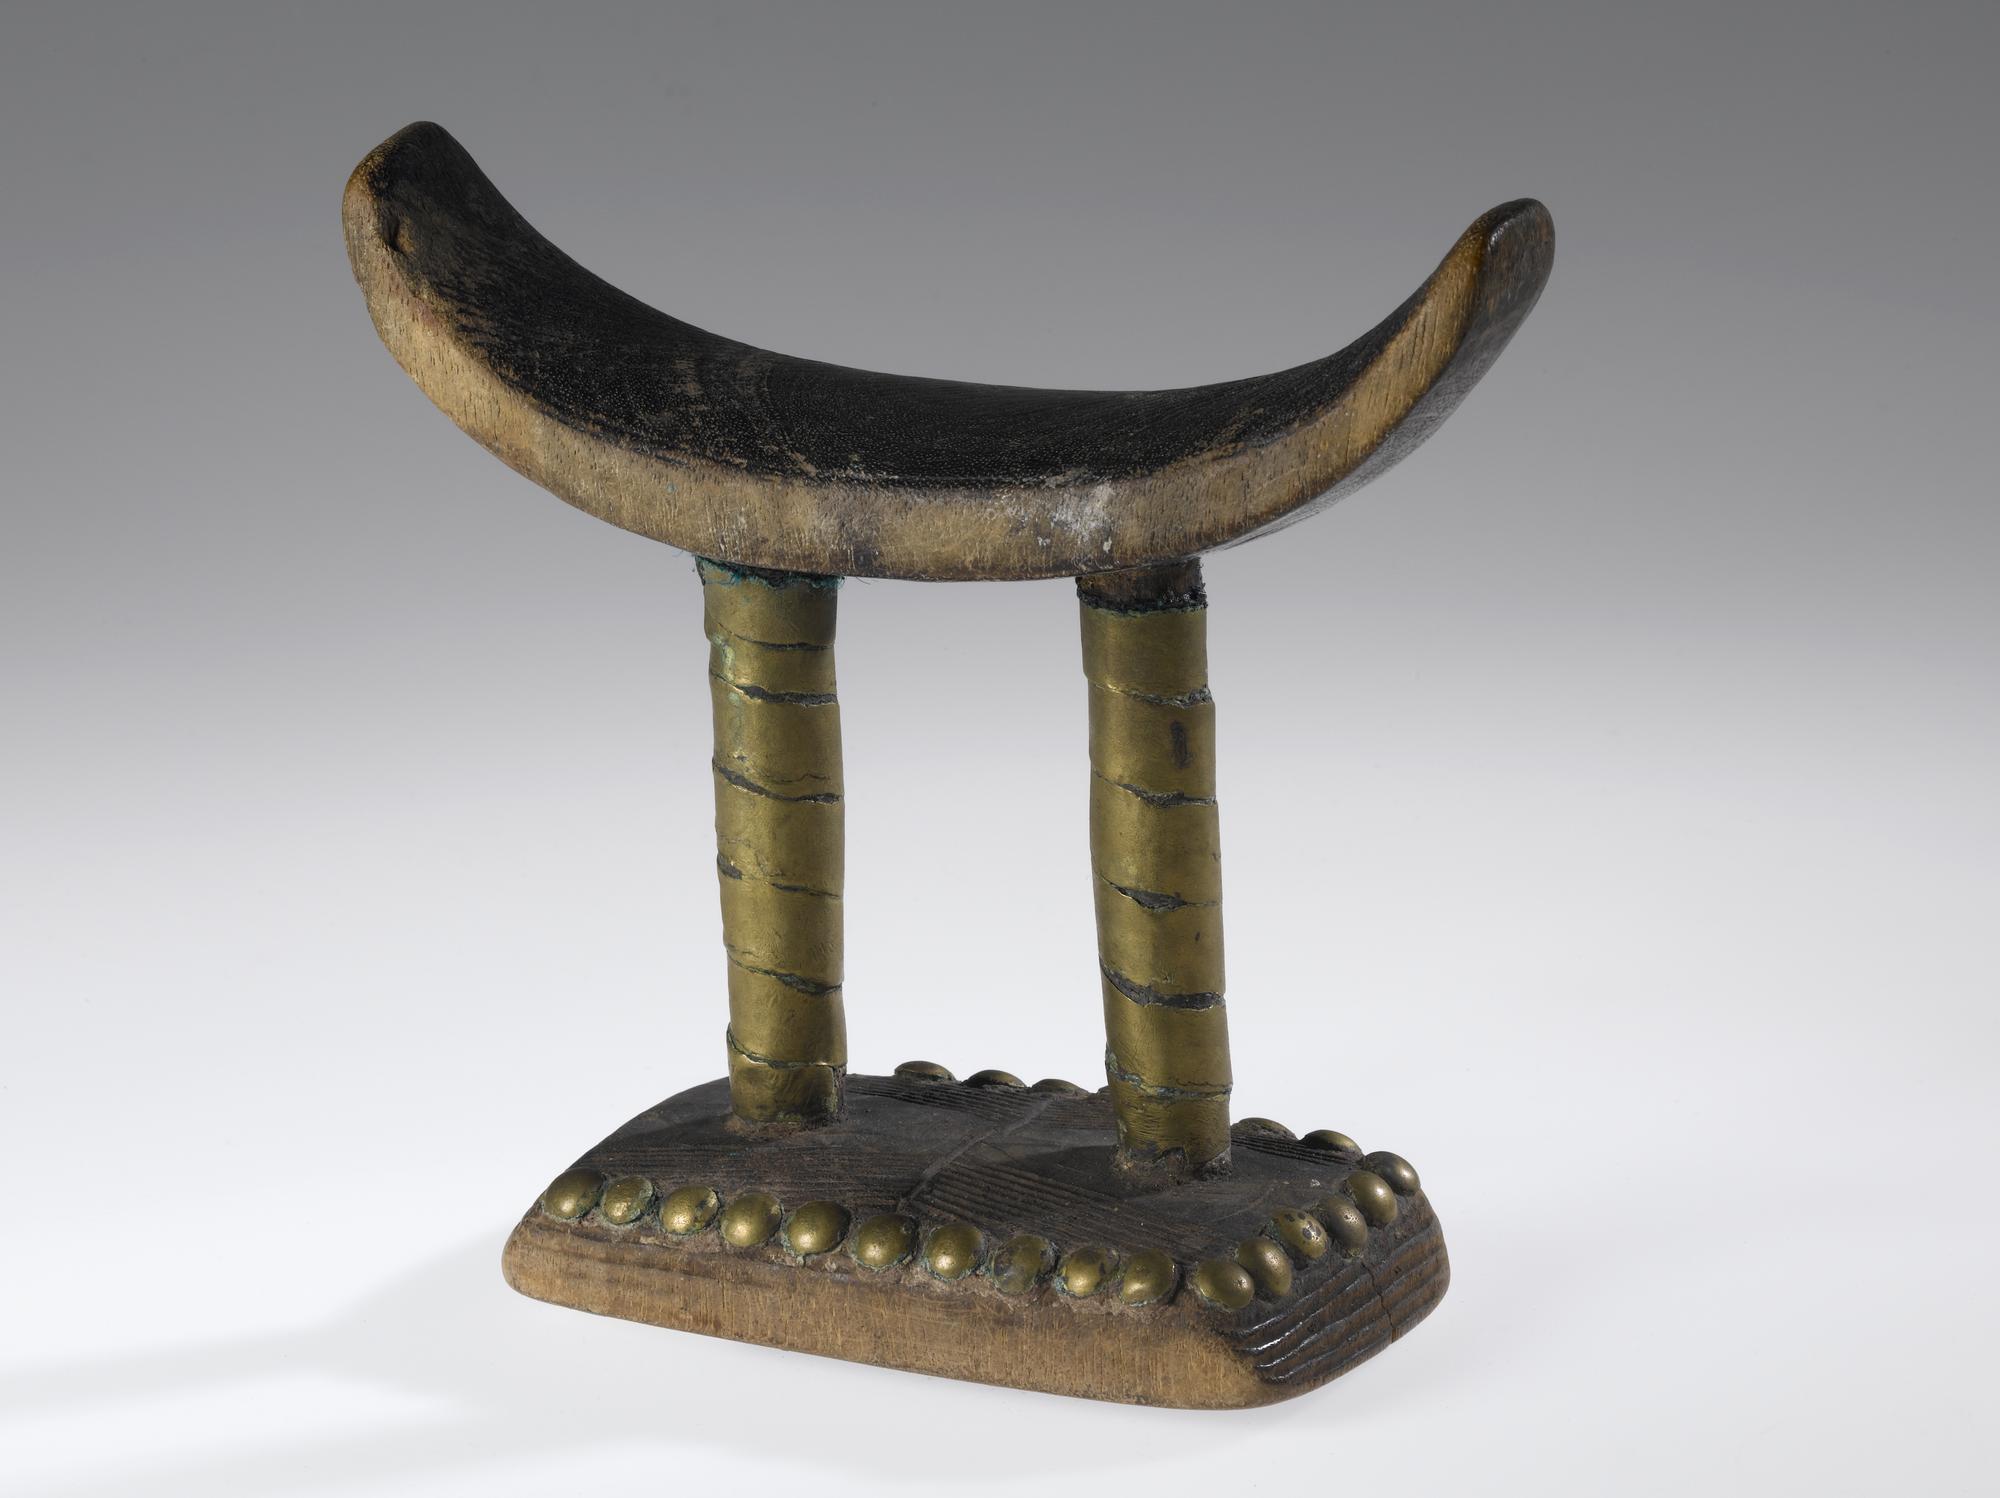 Headrest of carved camwood with two supports wrapped in brass and a base decorated with brass studs: Africa, Central Africa, Democratic Republic of the Congo, Mongo, early 20th century.